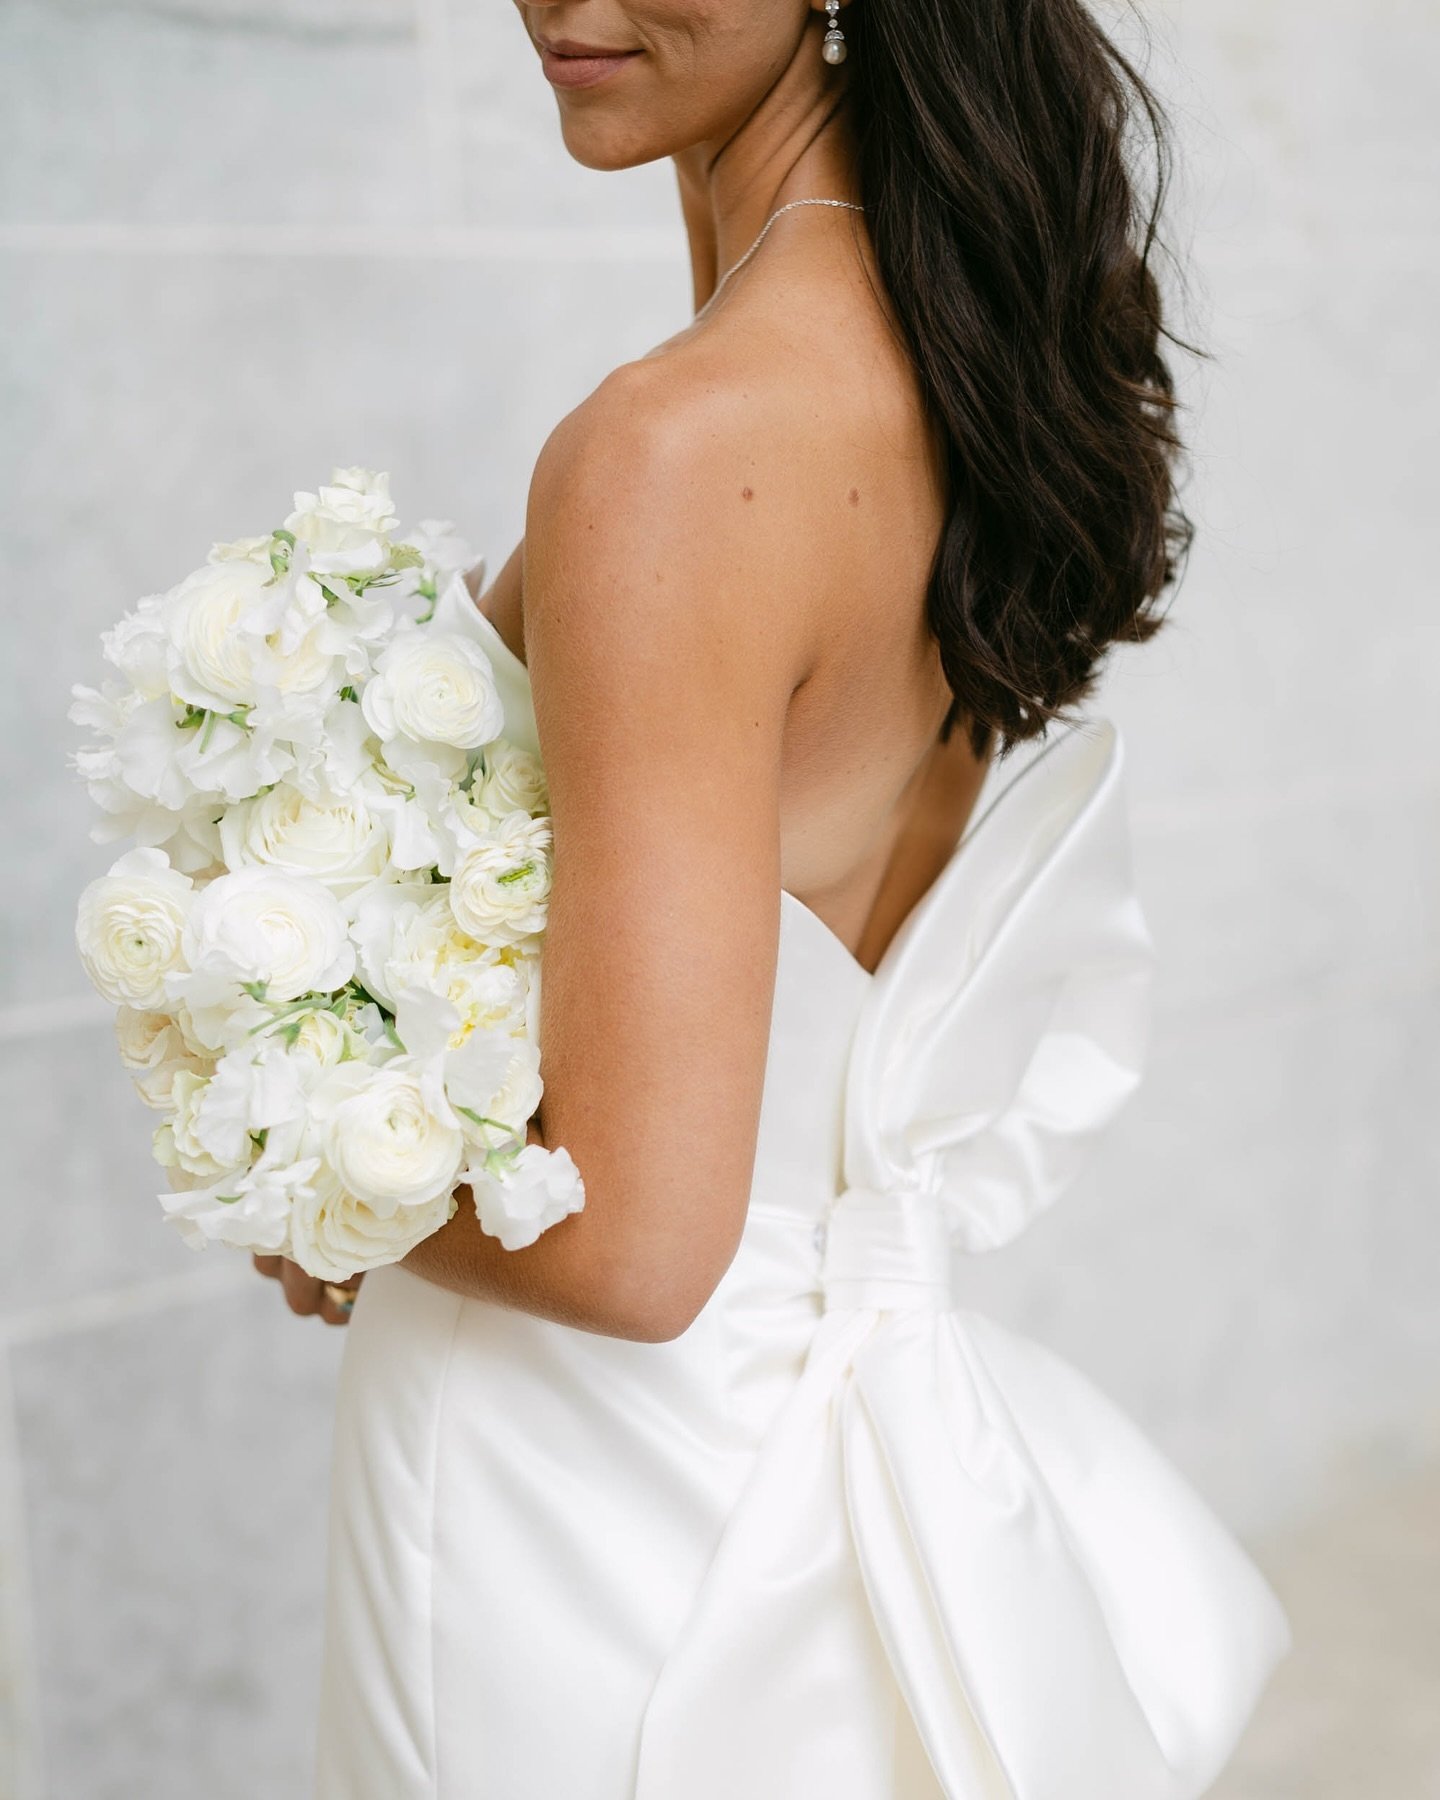 A bow is always a beautiful touch to a simple, elegant dress! I&rsquo;m still obsessed with my wedding dress that had a bow. I love seeing the dresses that my brides choose for their special day! 🤍